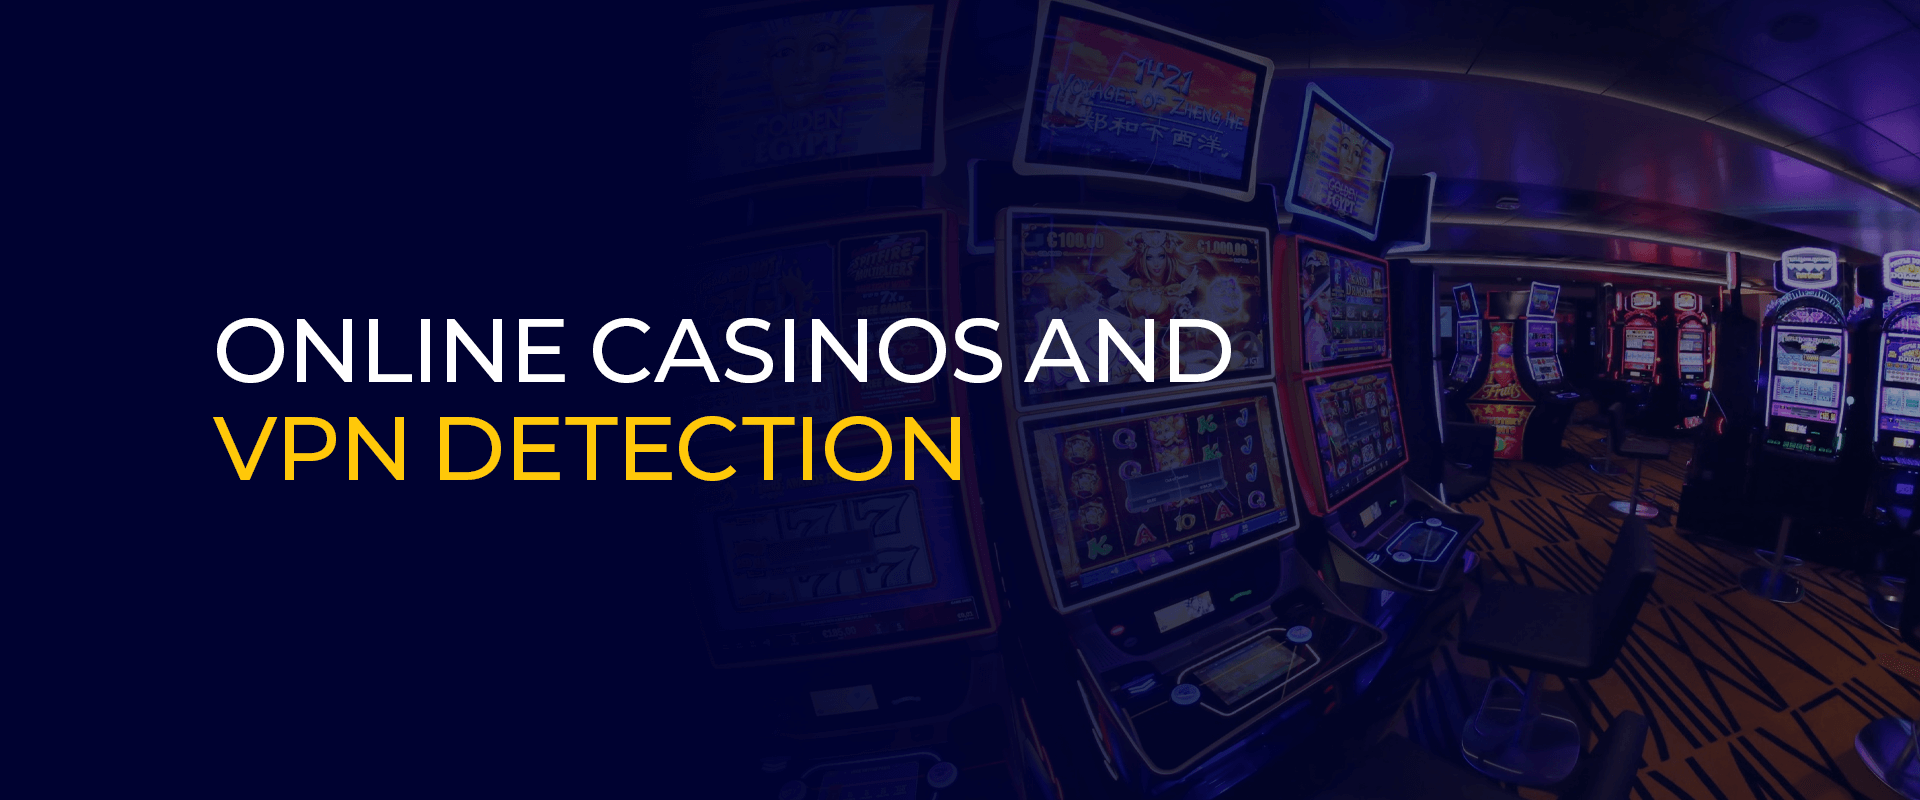 Online Casinos And VPN Detection